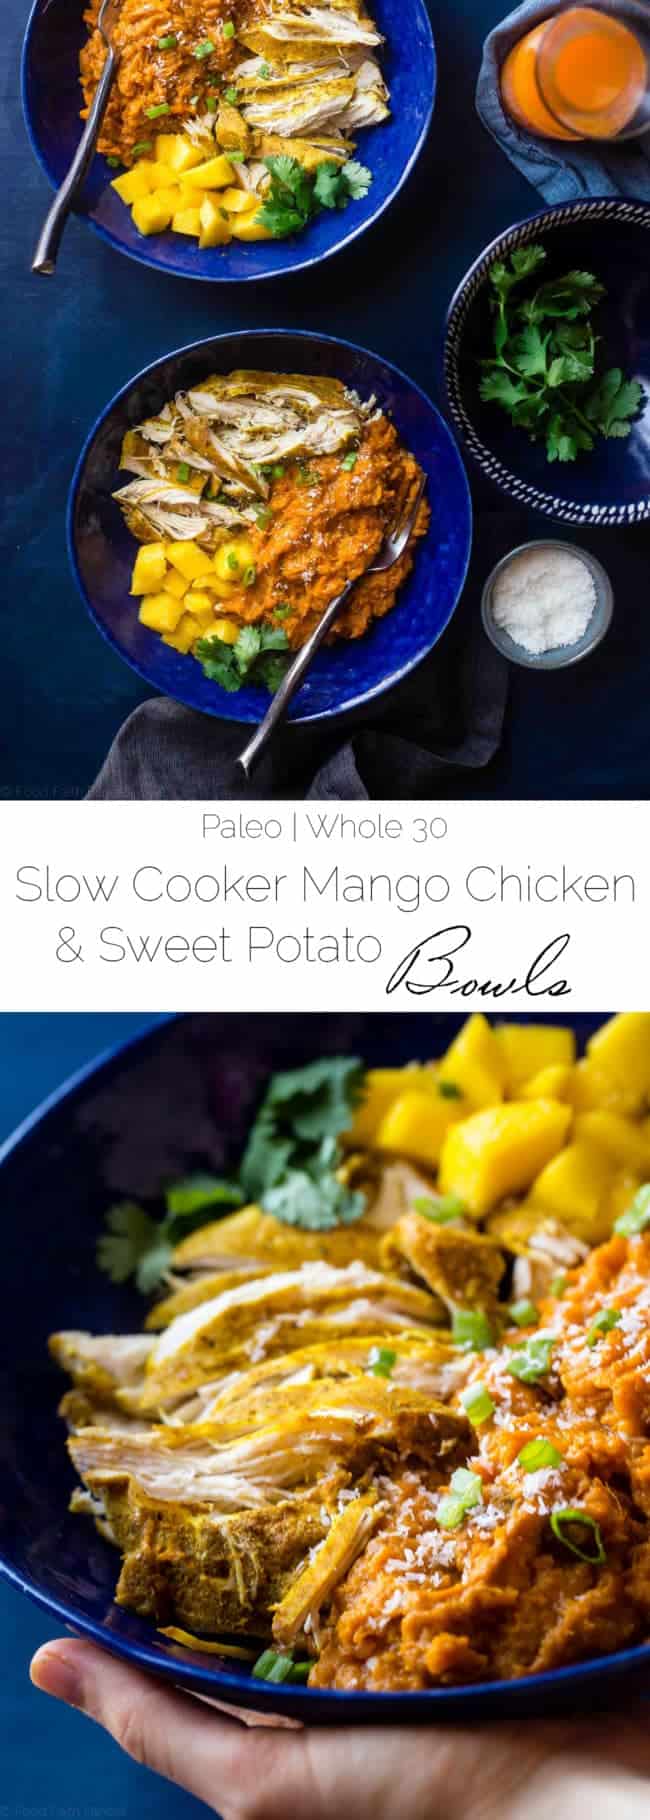 Slow Cooker Mango Chicken and Sweet Potato Bowls - This whole30 approved slow cooker mango chicken has a sweet, tropical sauce and sweet potatoes! It's a healthy, one pot meal that's perfect for busy weeknights! | Foodfaithfitness.com | @FoodFaithFit